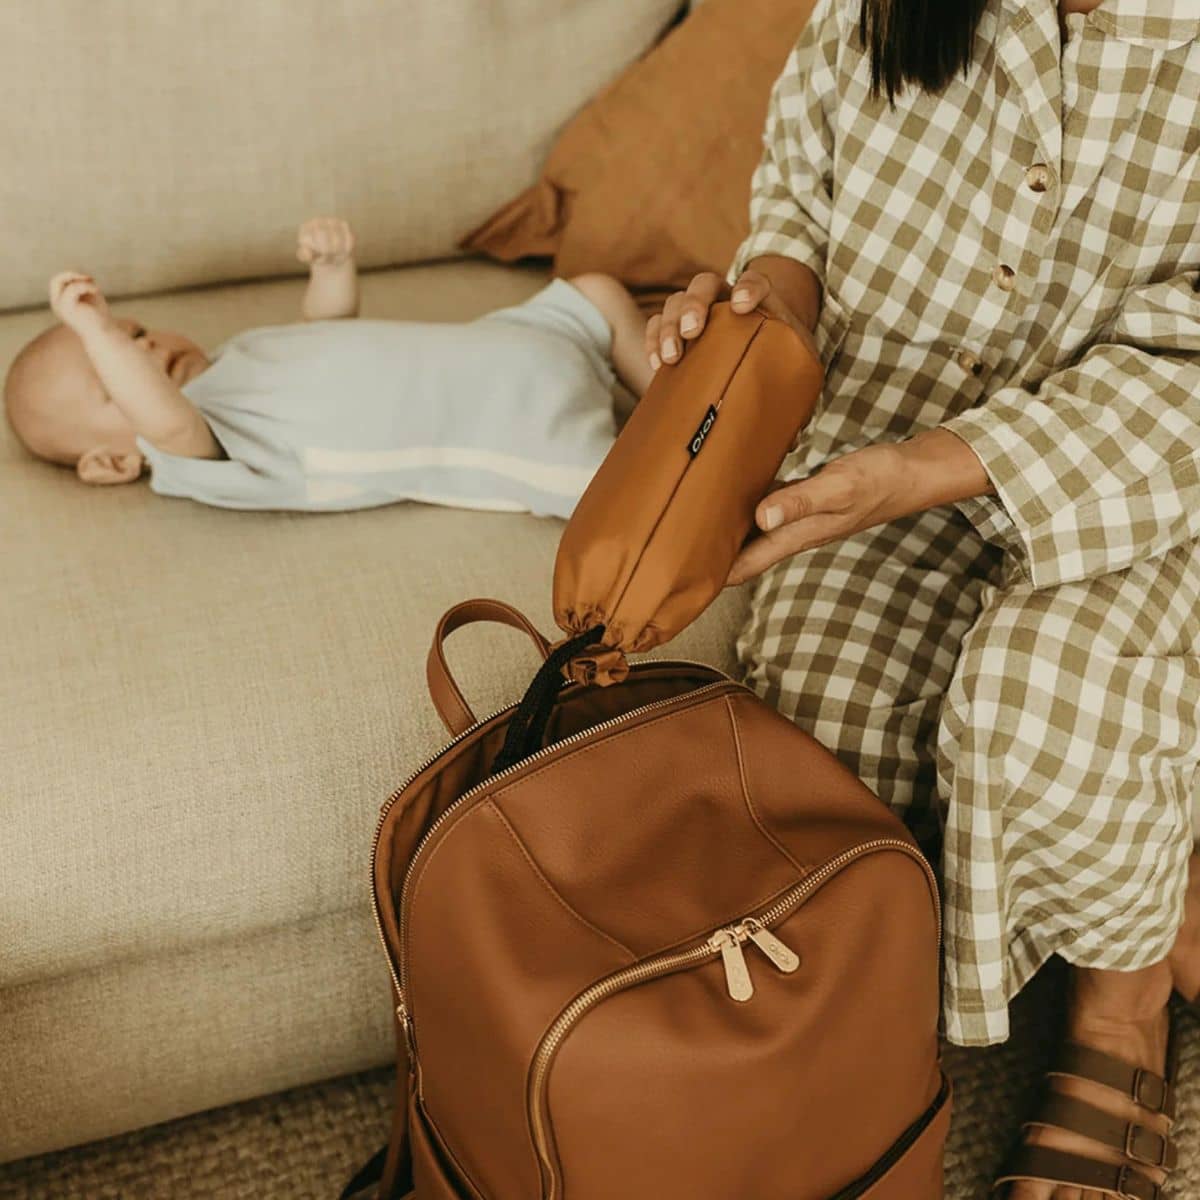 OiOi Faux Leather Multitasker Nappy Backpack - Chestnut